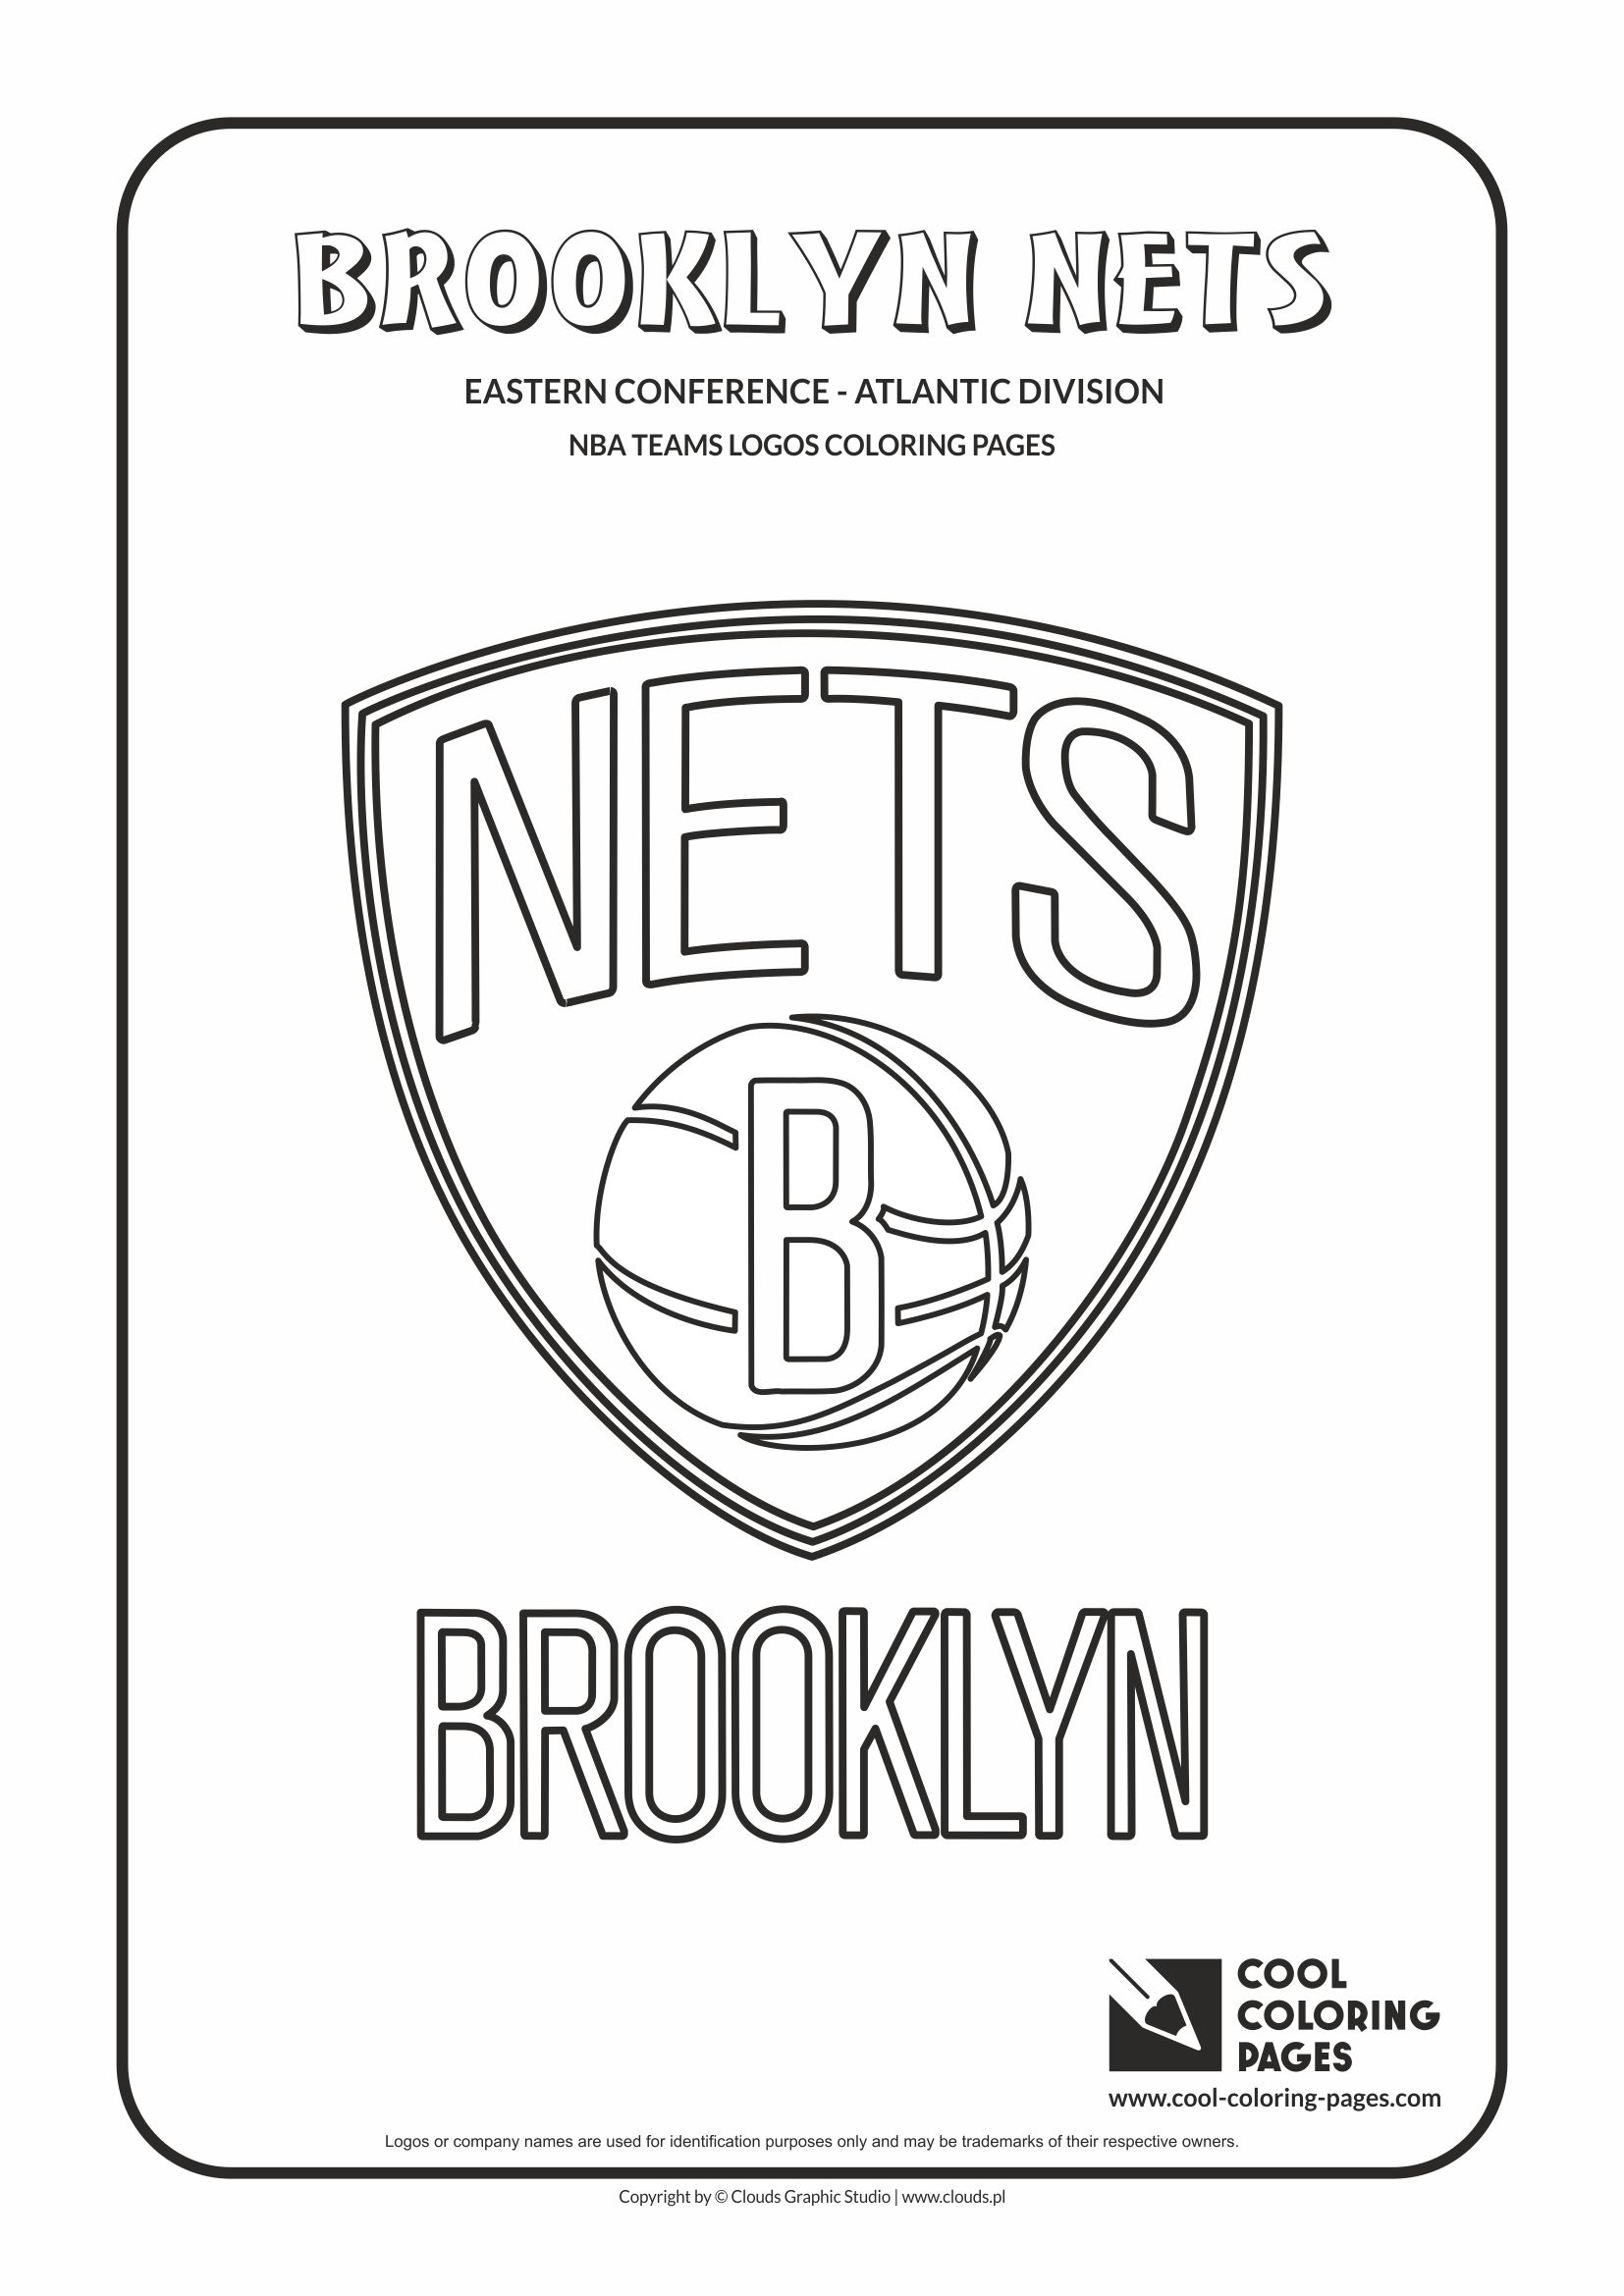 Cool Coloring Pages Brooklyn Nets - NBA basketball teams logos coloring pages - Cool ...1654 x 2339